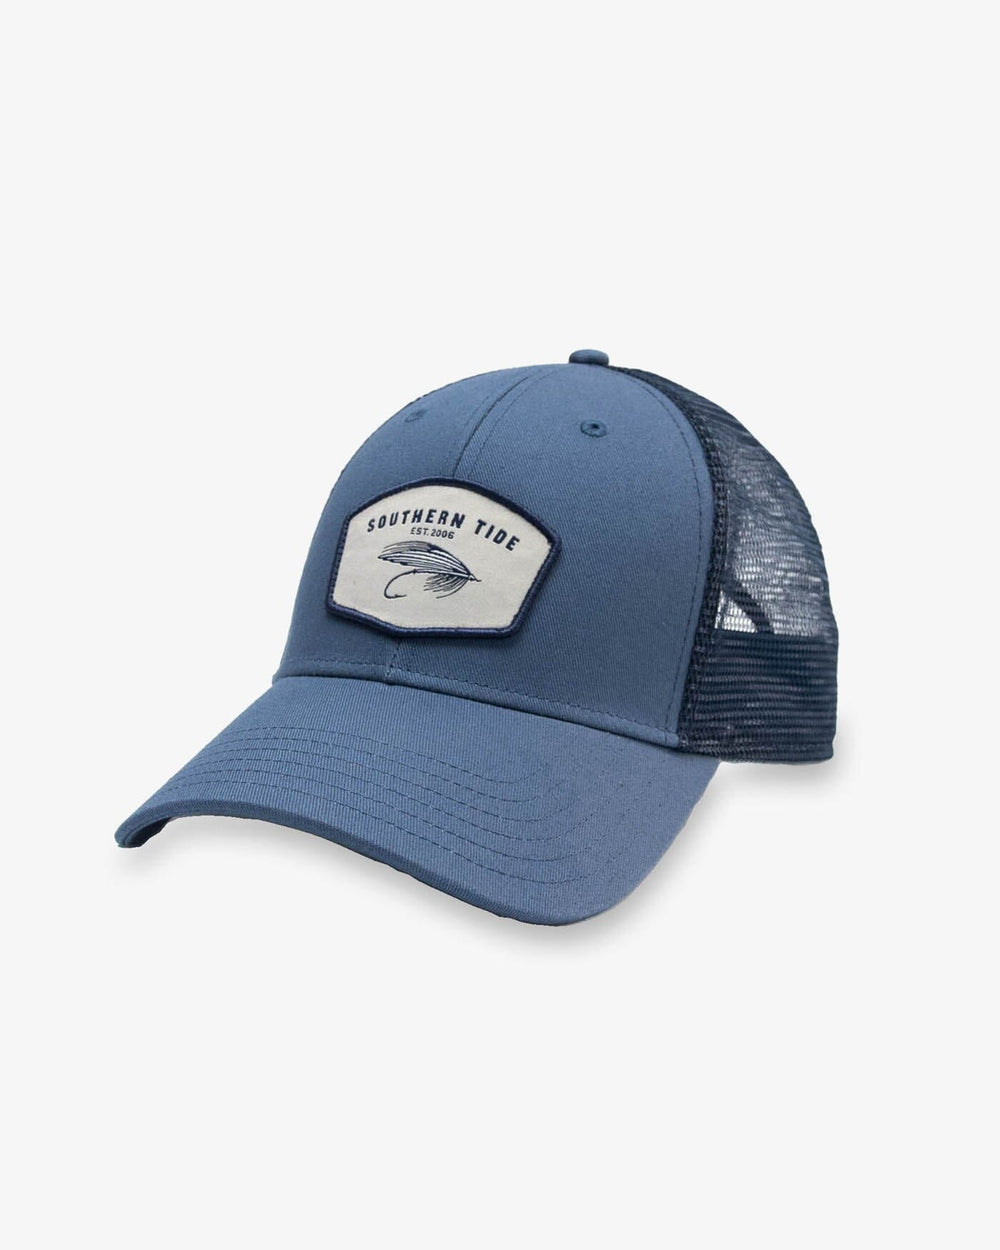 The front view of the Southern Tide ST Fly Trucker Hat by Southern Tide - Blue Ashes